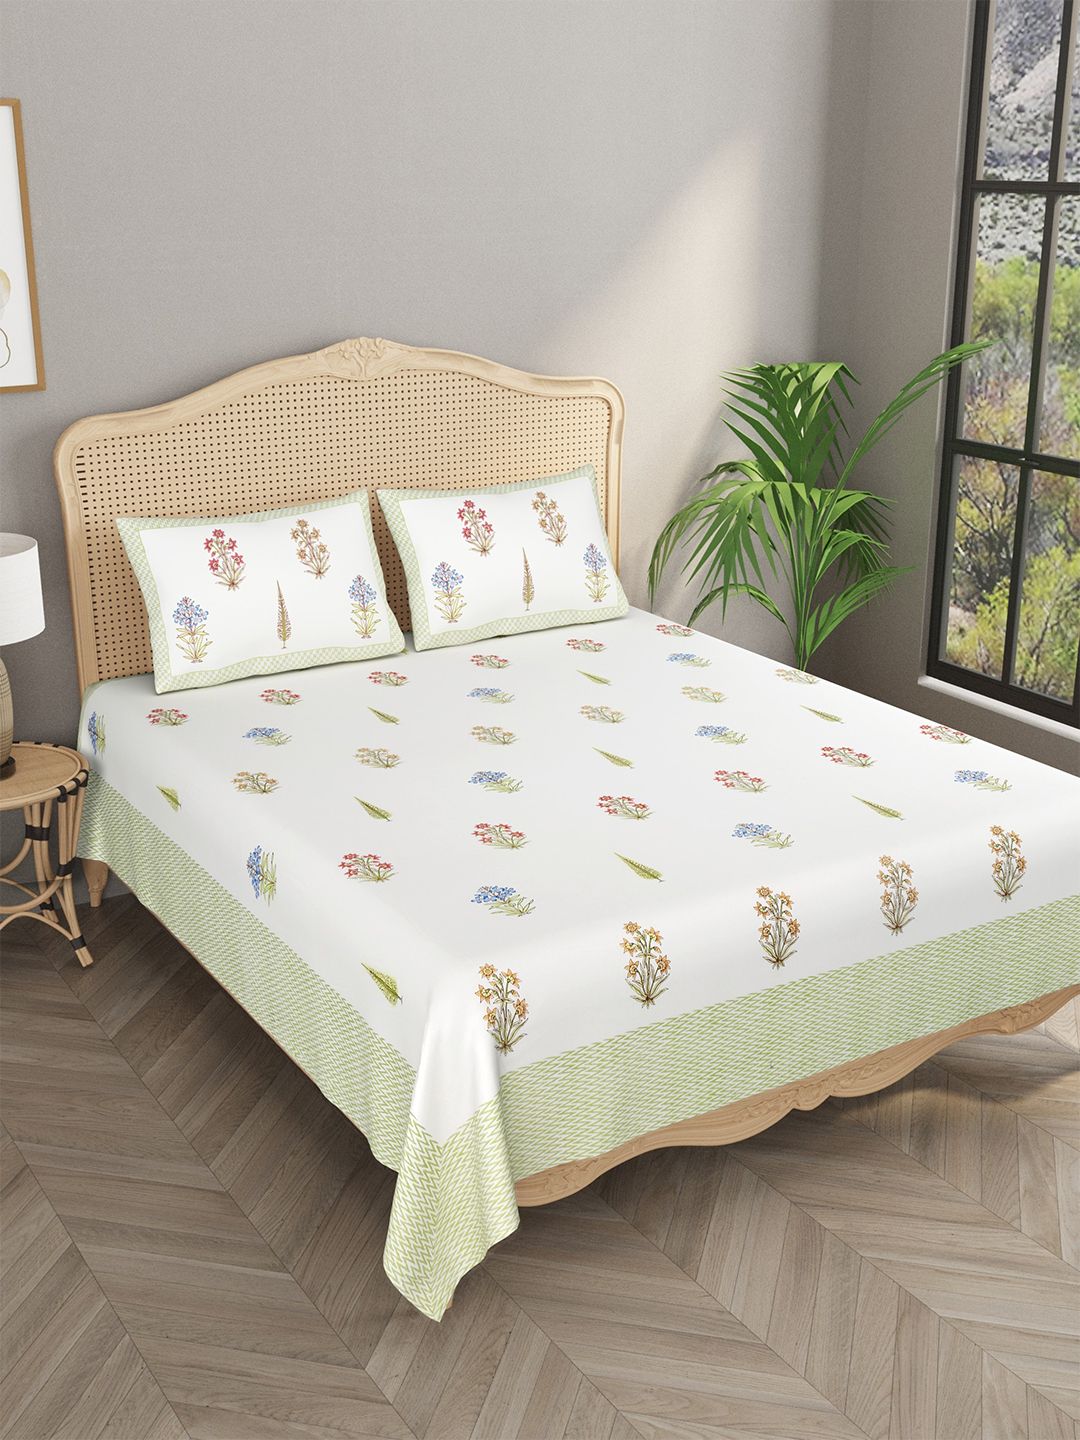 Gulaab Jaipur 600 TC 130 GSM Egyptian Cotton King Size Bedsheet With 2 Pillow Covers Price in India